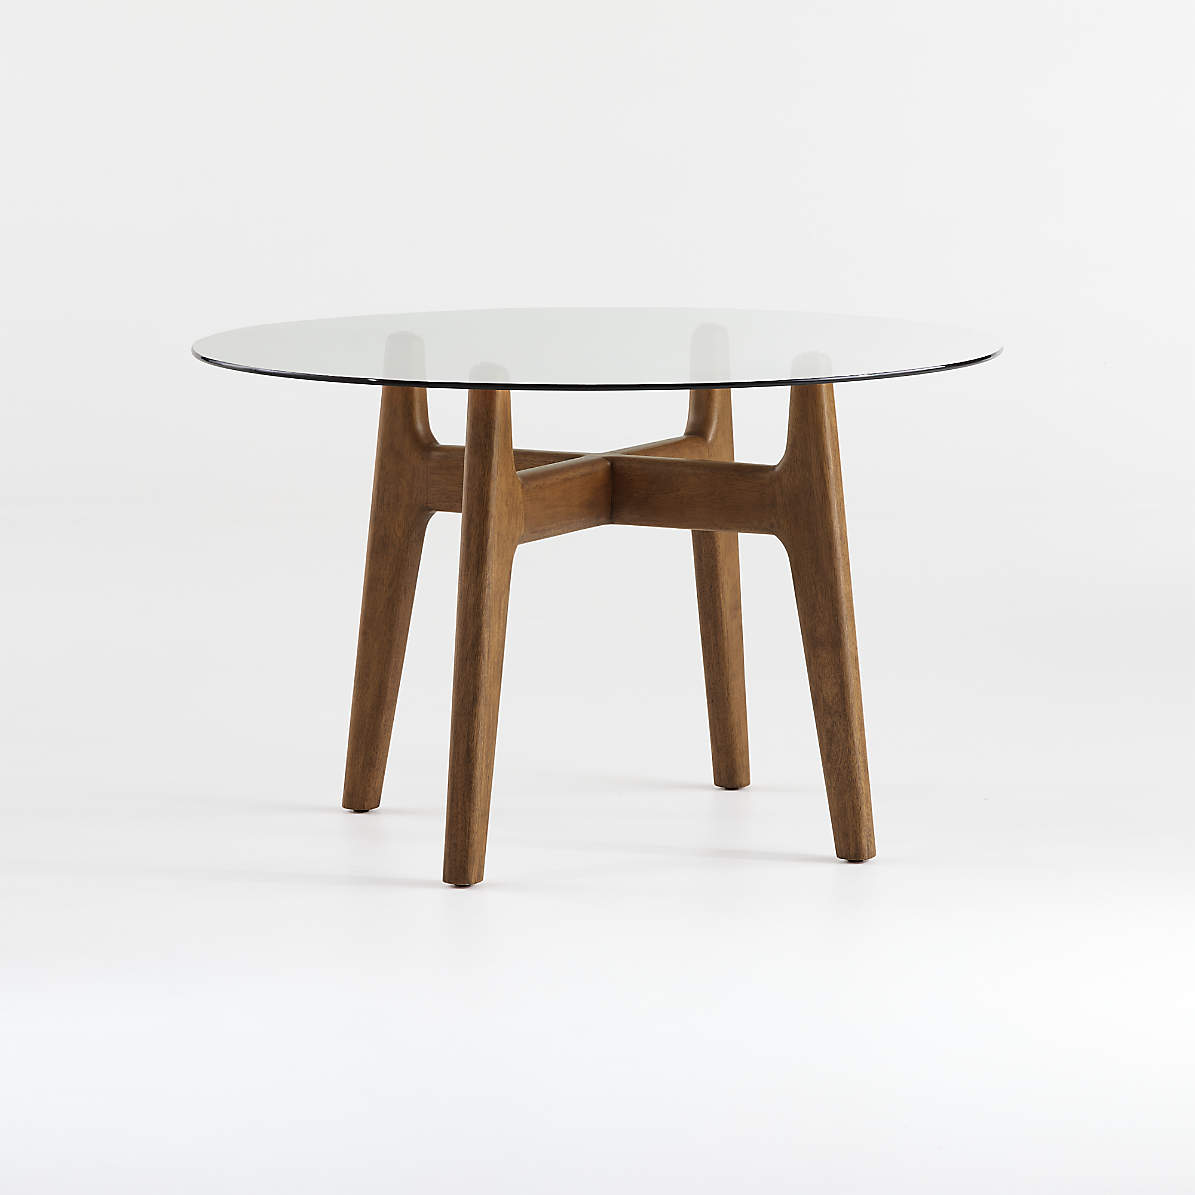 Tate 48 Round Dining Table With Glass, Round Glass Dining Table Wooden Base